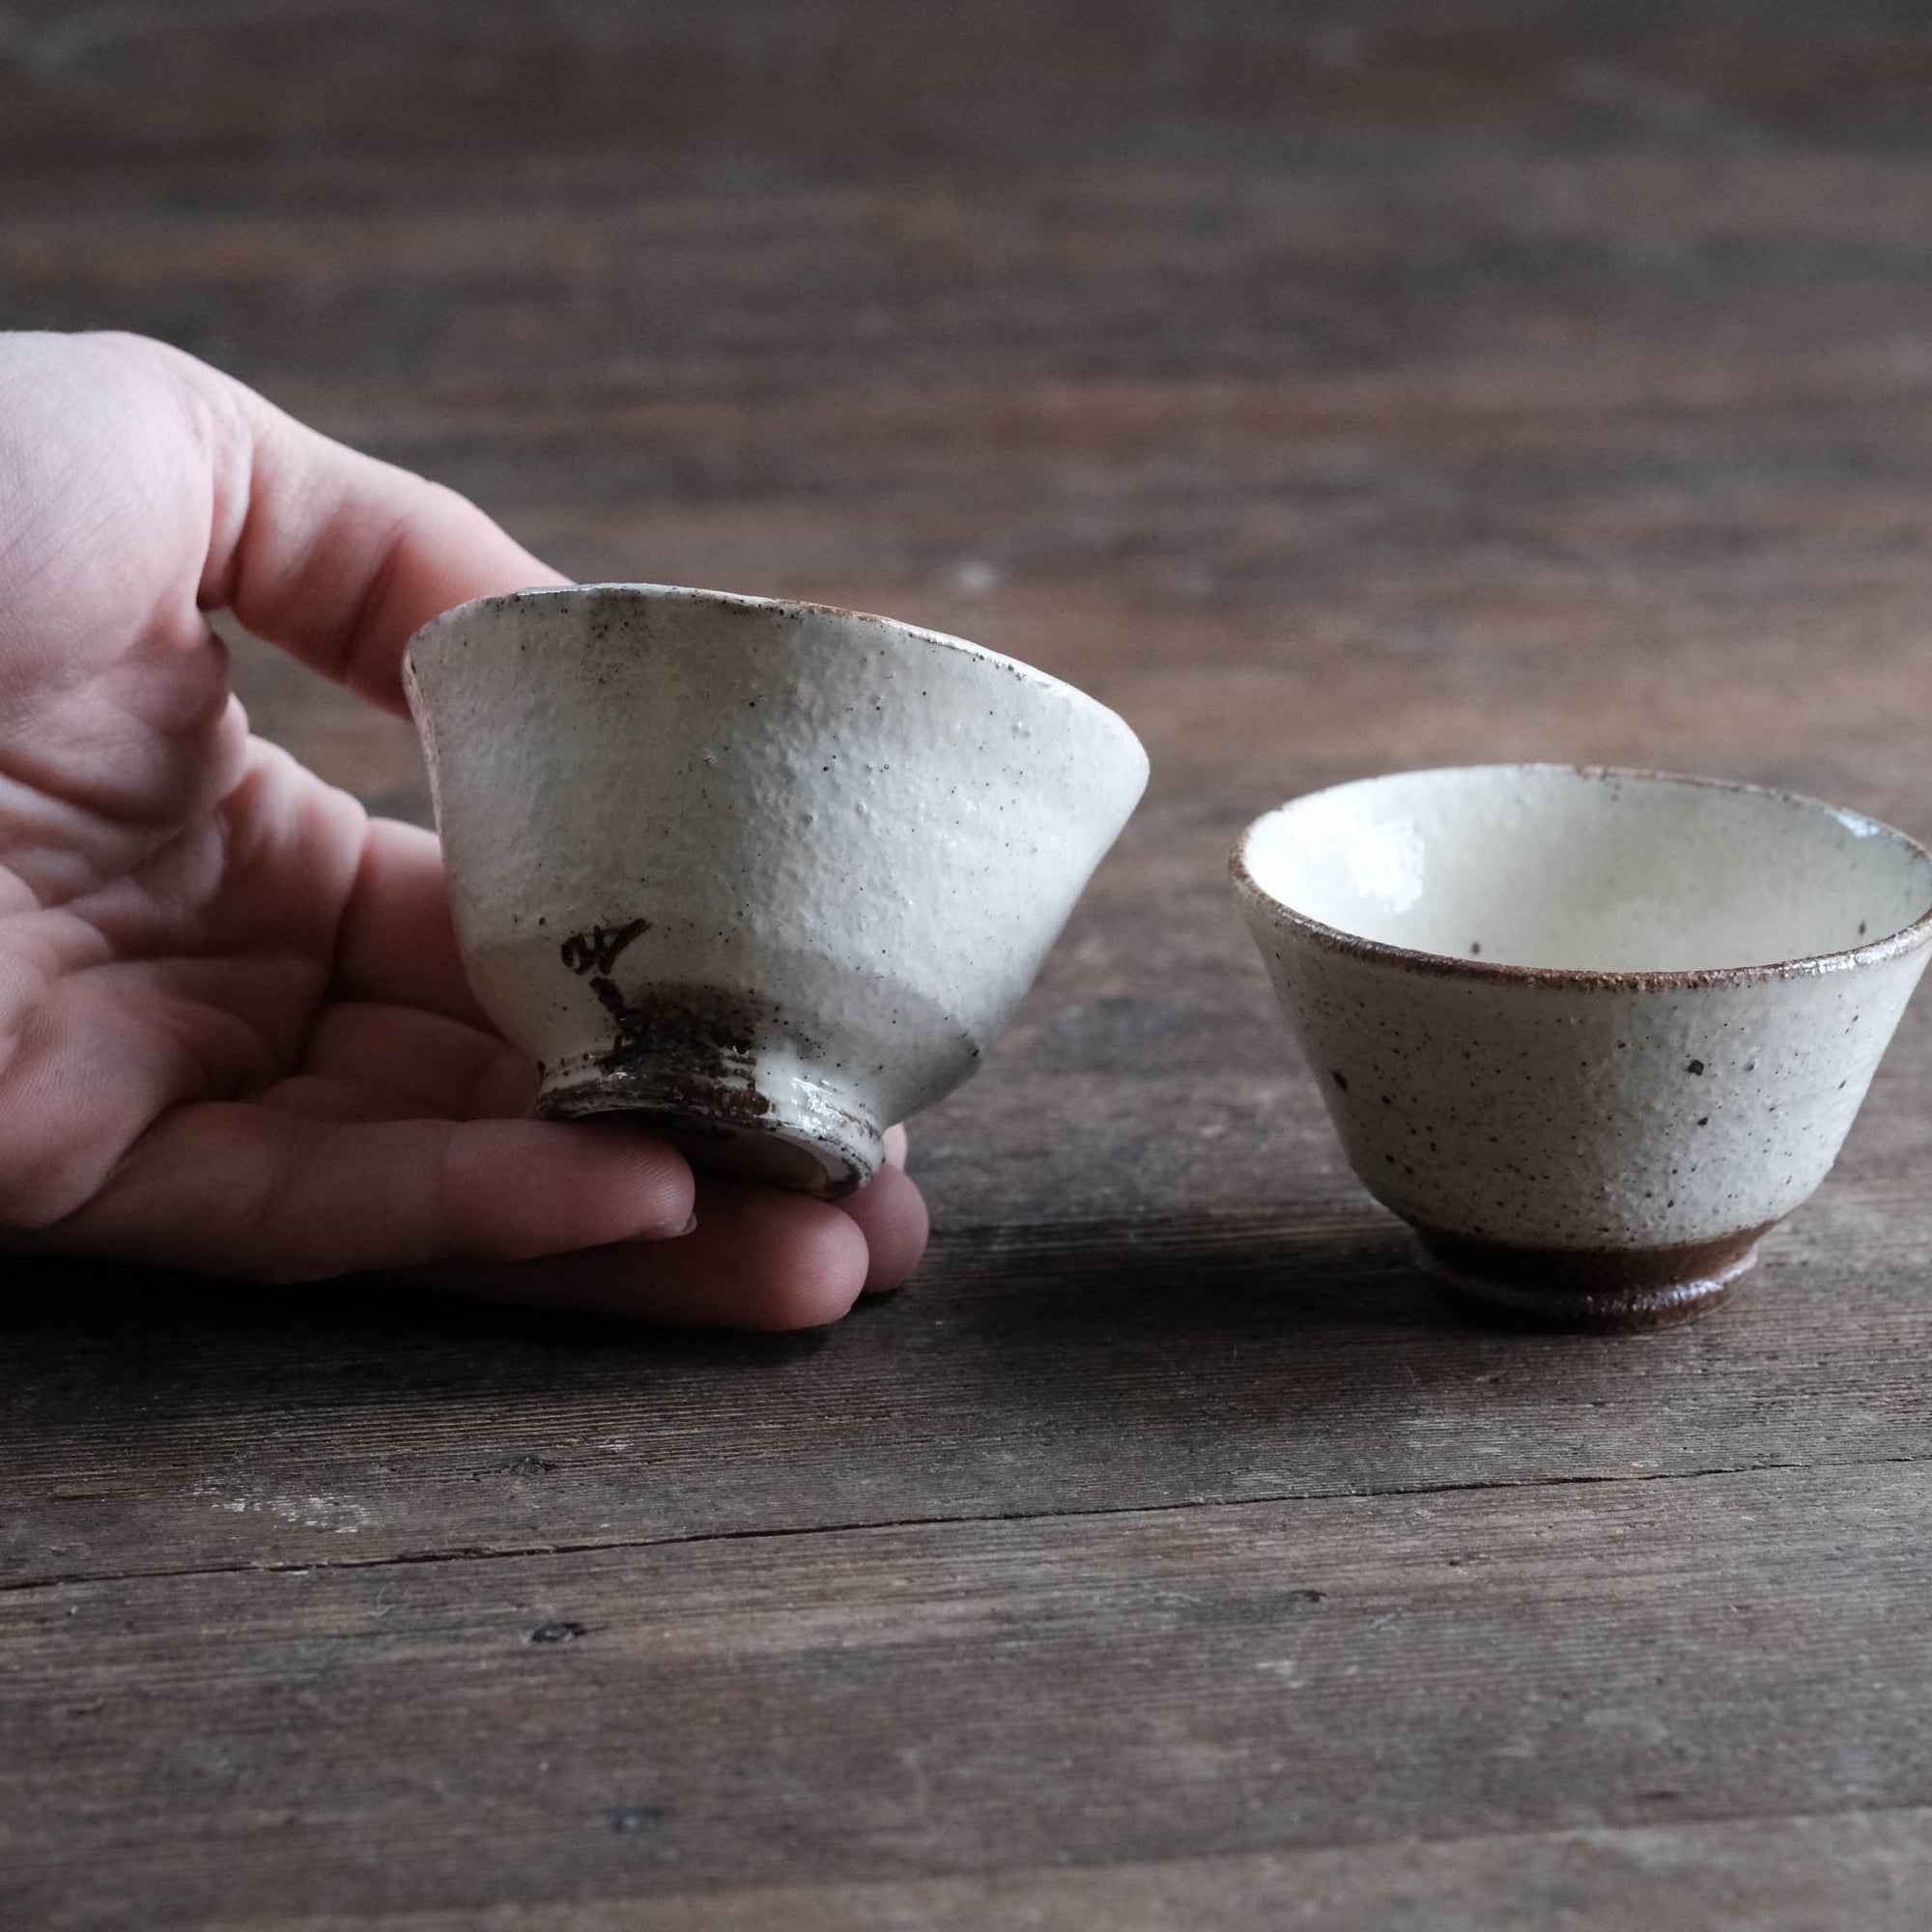 Set of Small Tea Cups, Dipped